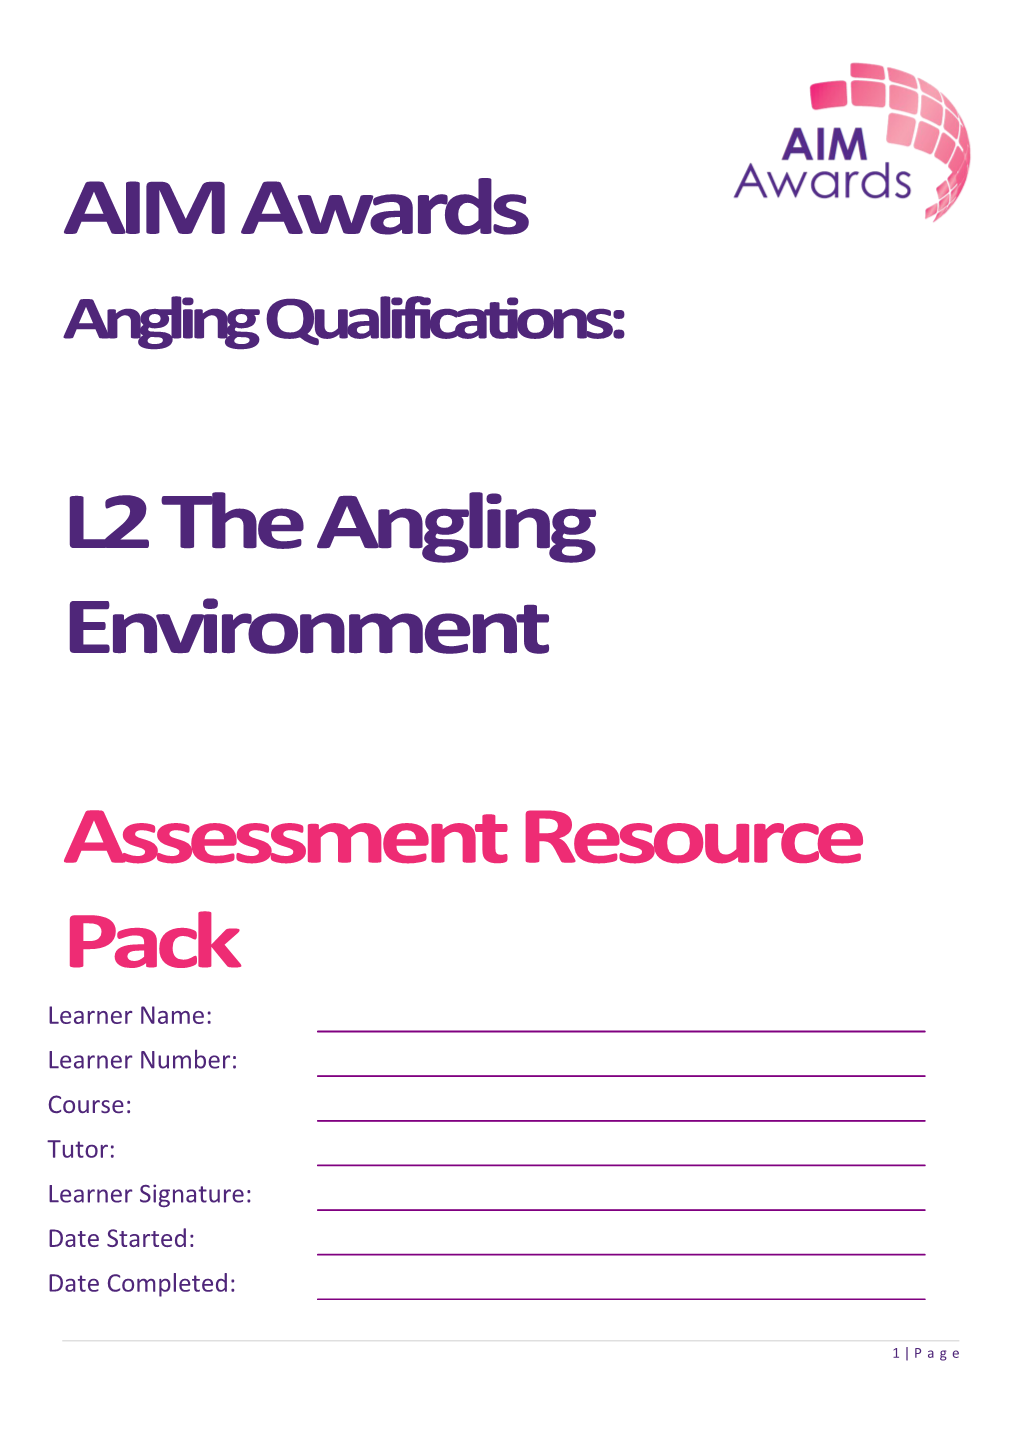 L2the Angling Environment